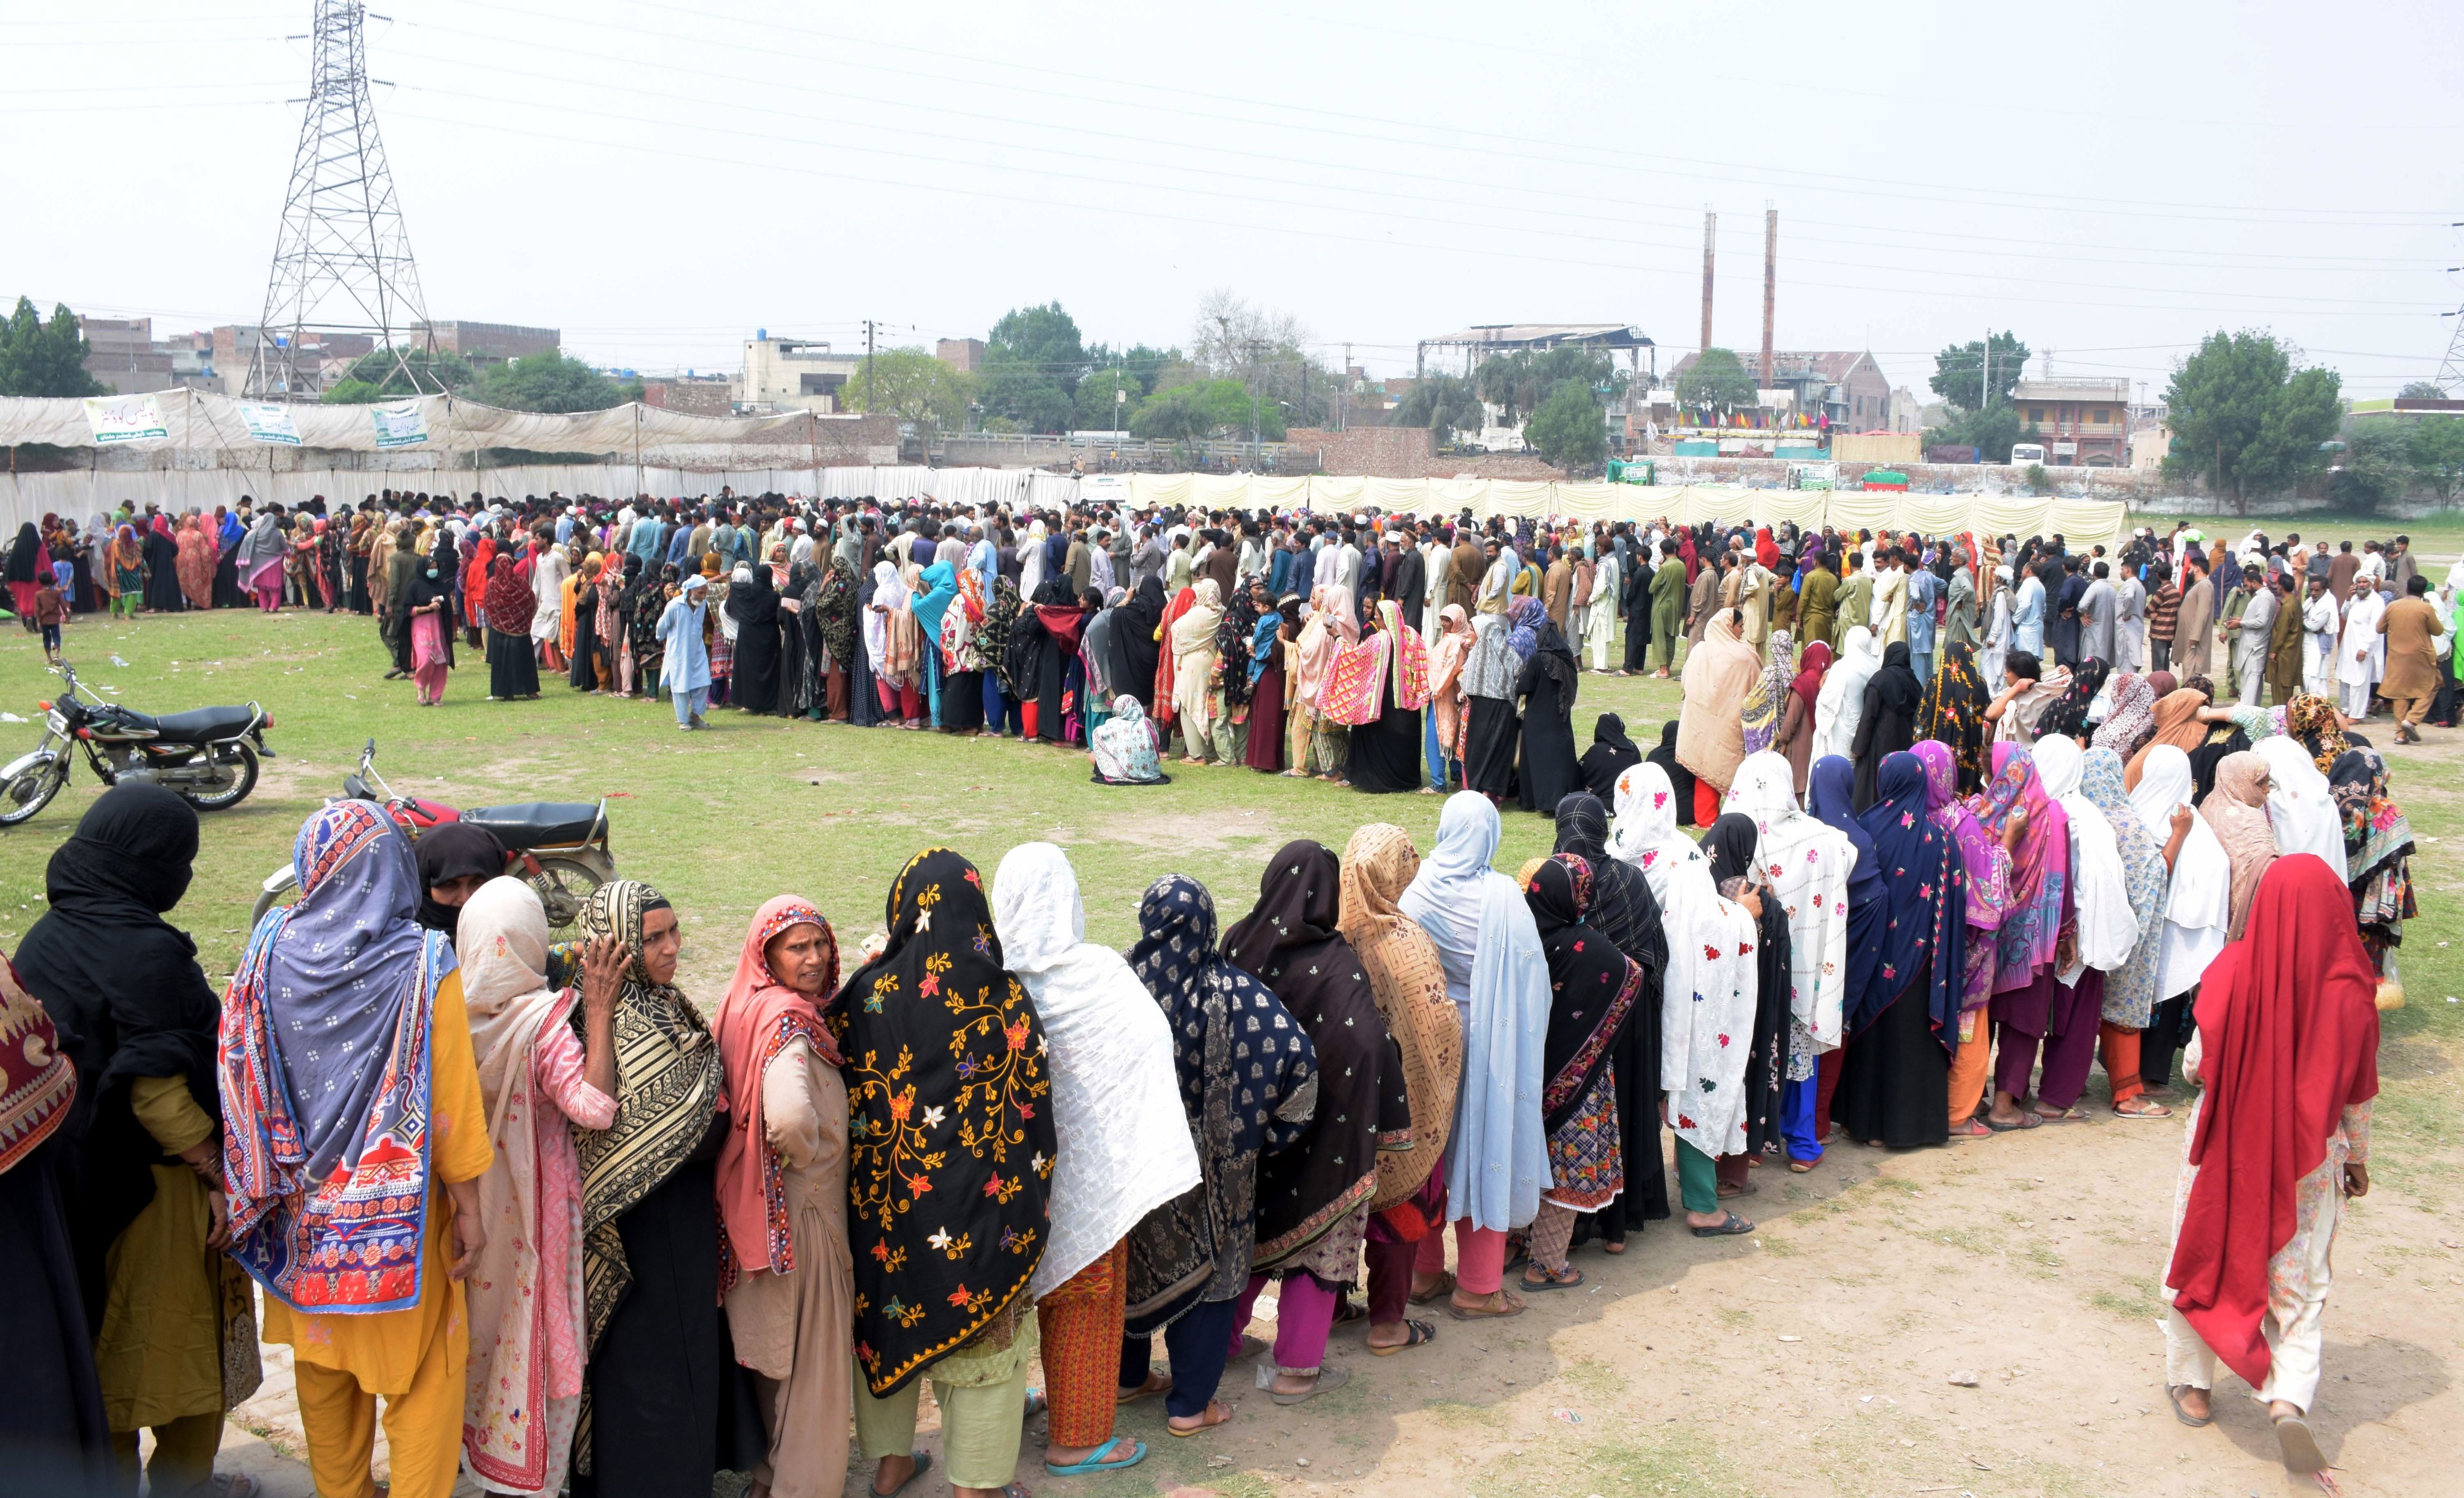 People queue up to receive free flour in Pakistan. A stampede that killed 11 people was the deadliest at Ramadan food distribution points since the start of the Islamic holy month of fasting. Photo: EPA-EFE